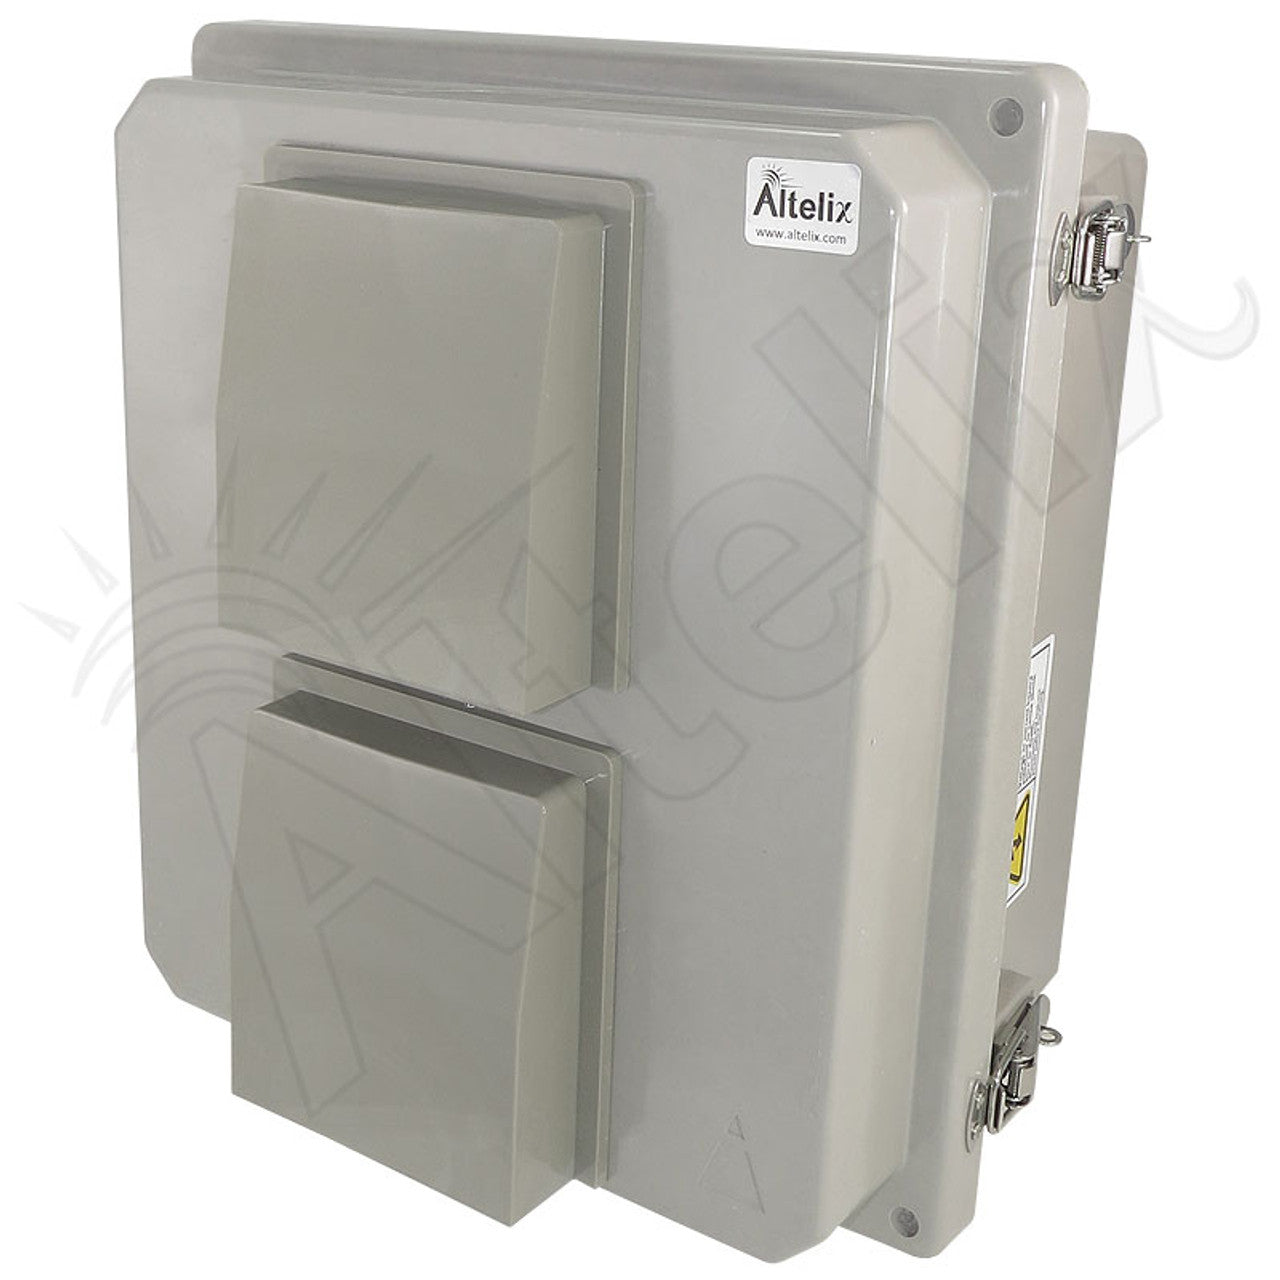 Altelix Insulated Fiberglass Weatherproof Vented NEMA Enclosure with Cooling Fan and 120 VAC Outlets